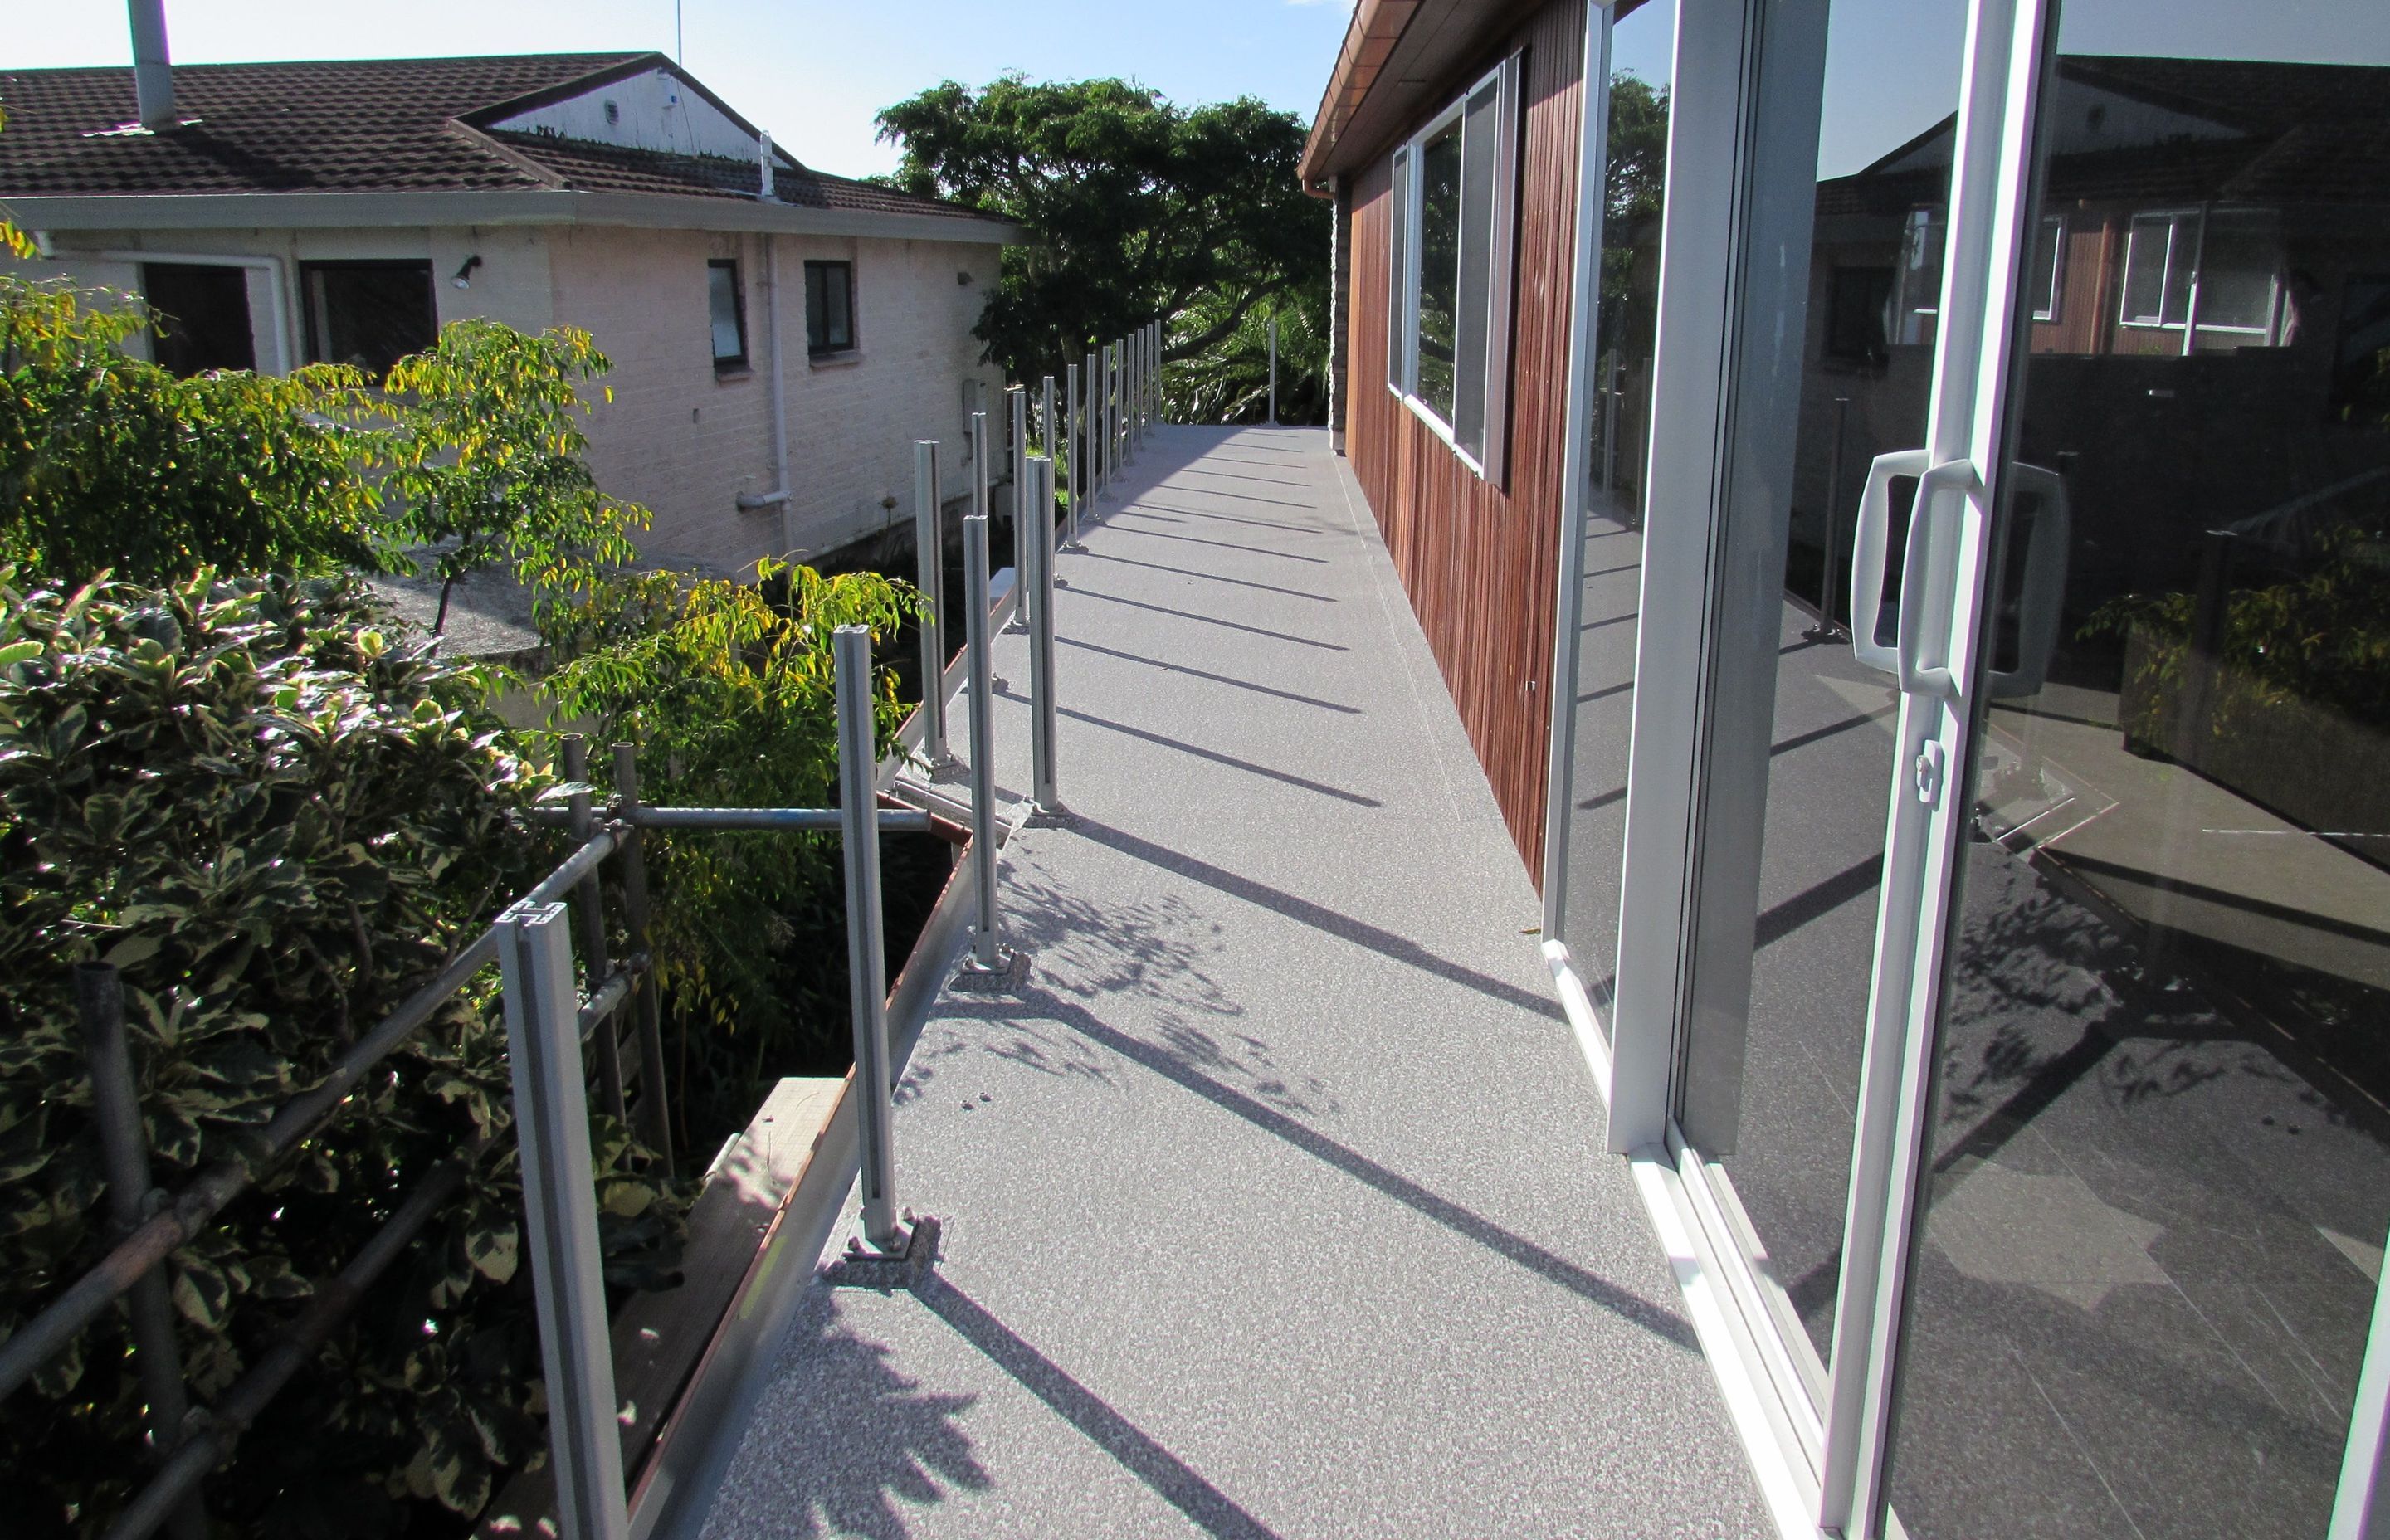 With a proven track-record in New Zealand over the last 20 years, Dec-K-ing is an ideal waterproofing solution for decks and walkways.